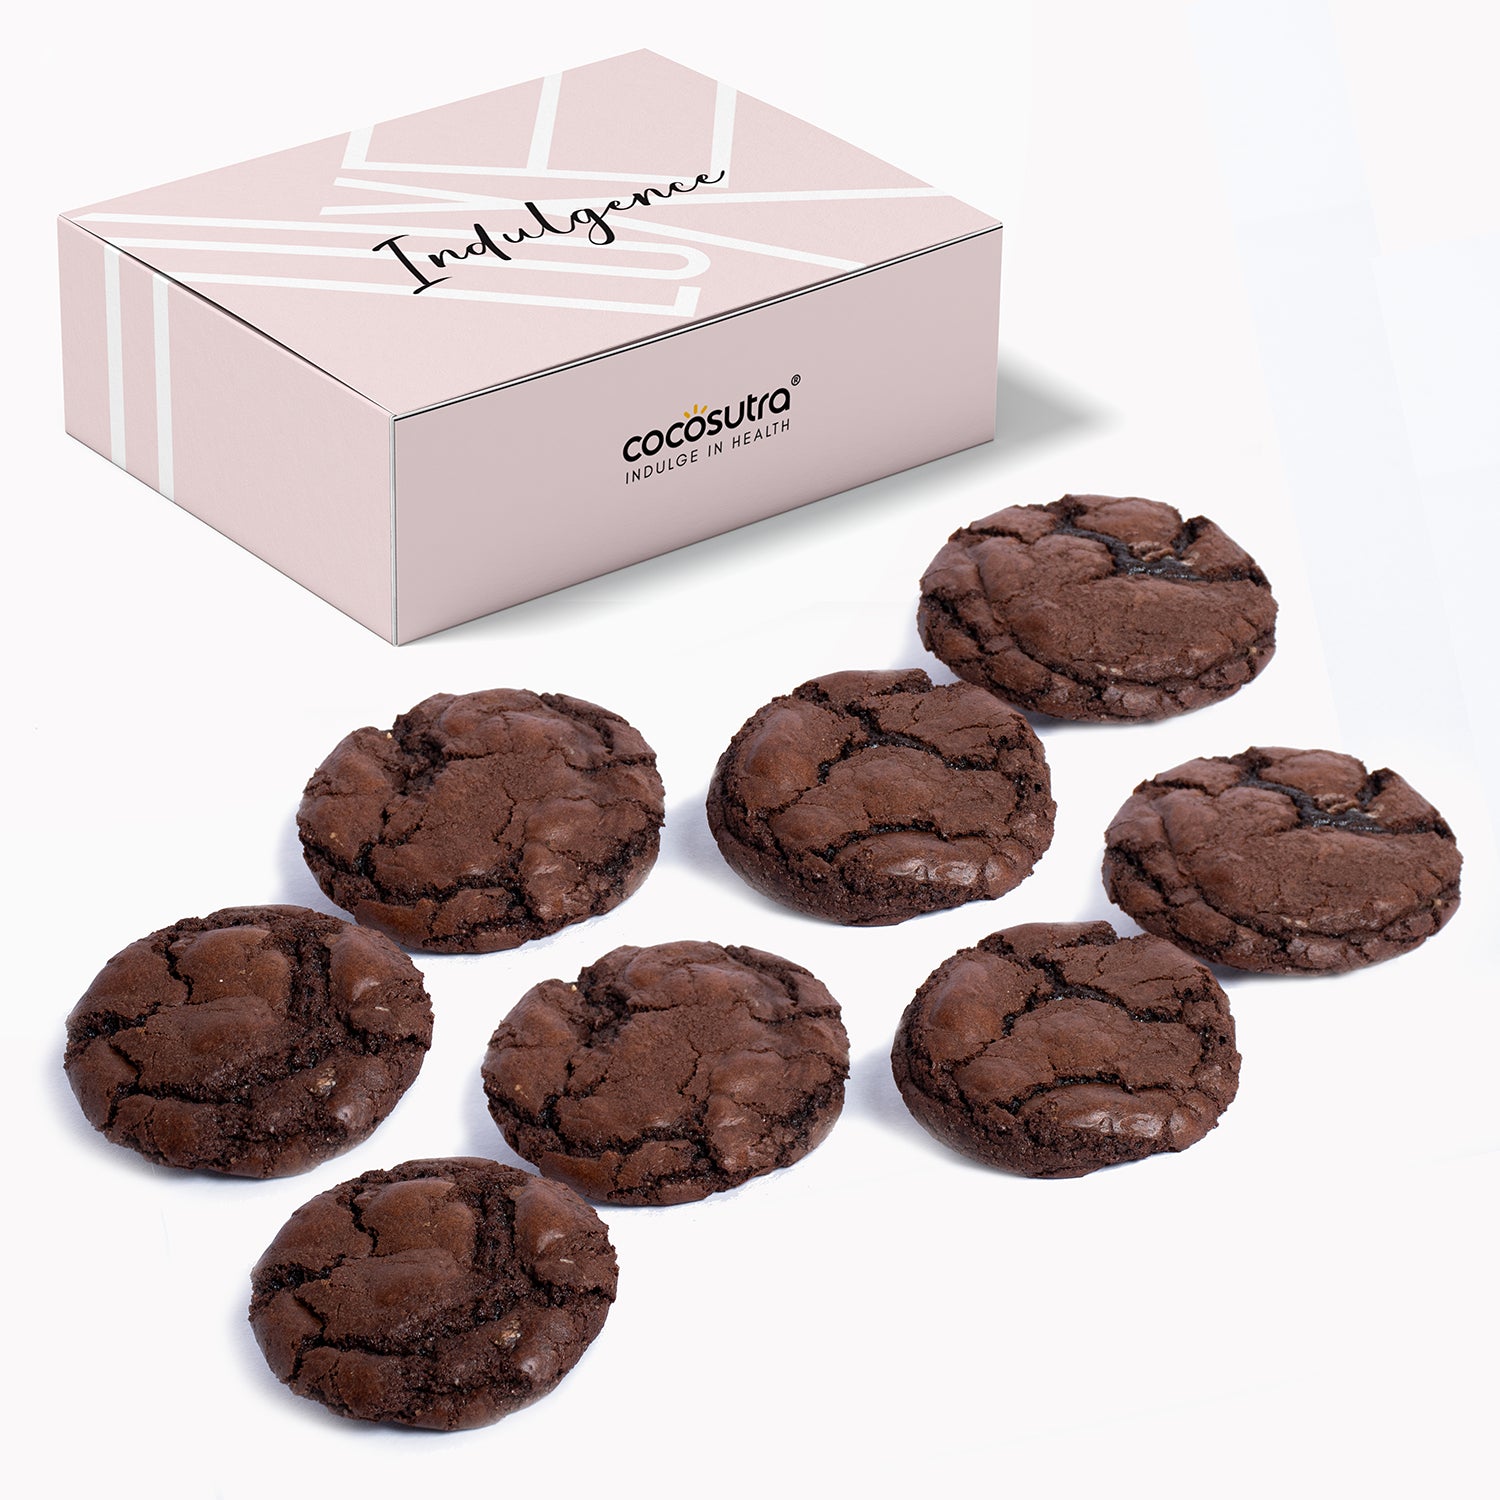 Cocosutra Fudgy Brownie Cookies - Freshly Baked - Eggless - Box of 8